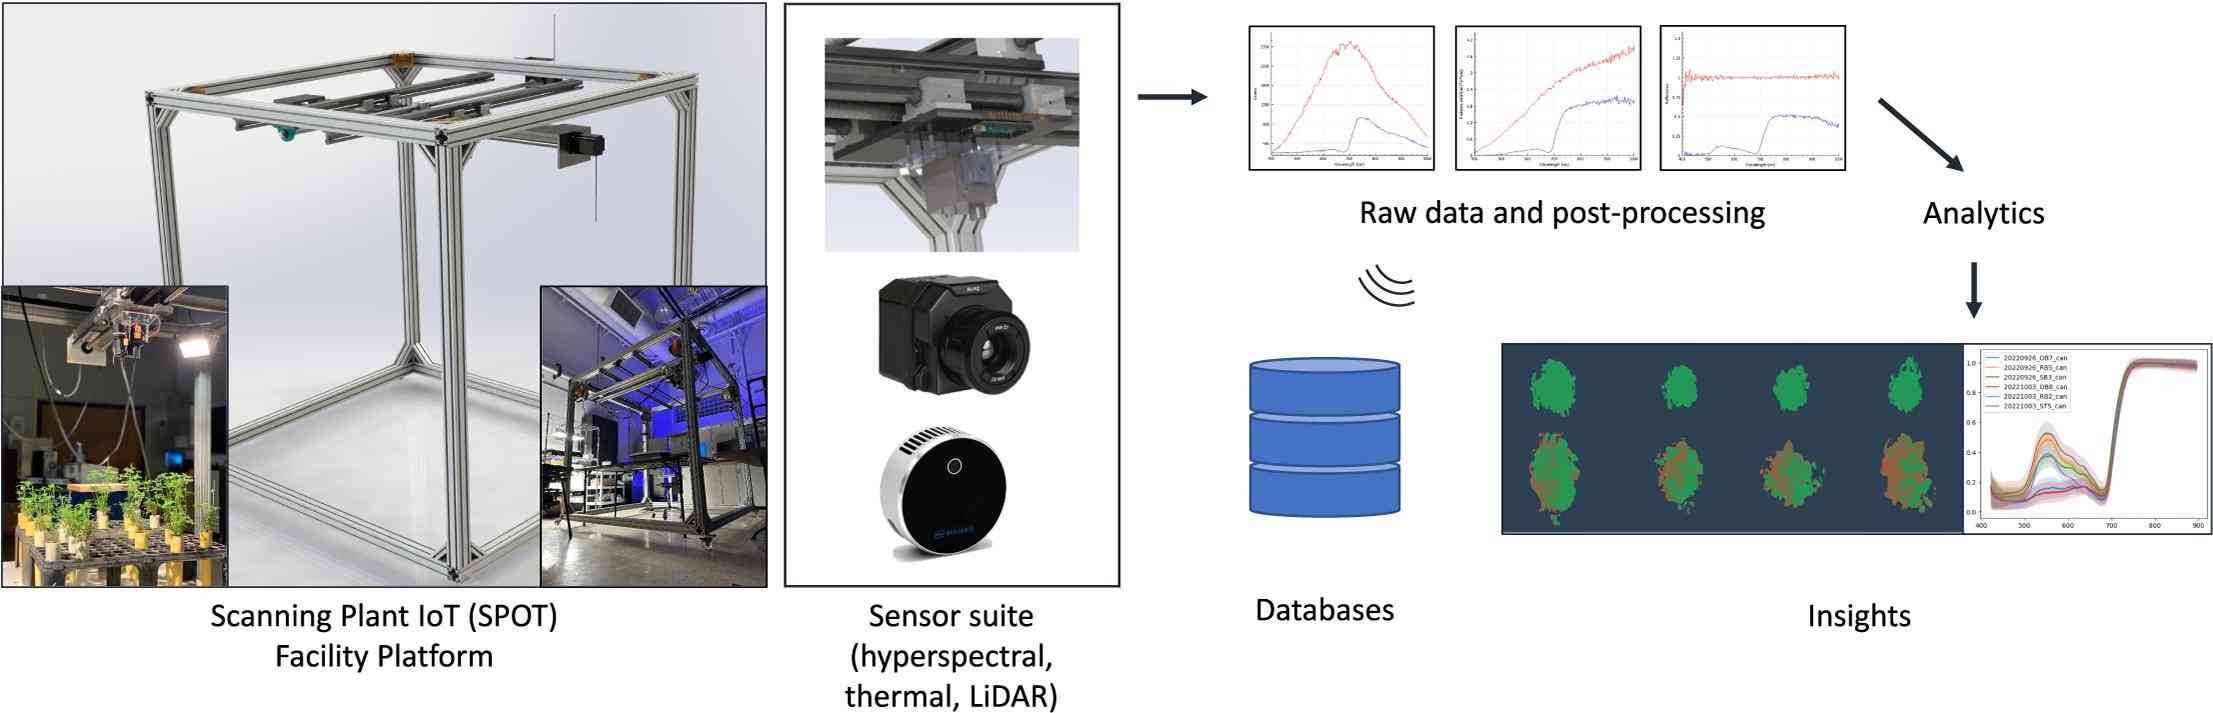 Figure 1. Scanning plant IoT facility for high-throughput plant phenotyping.